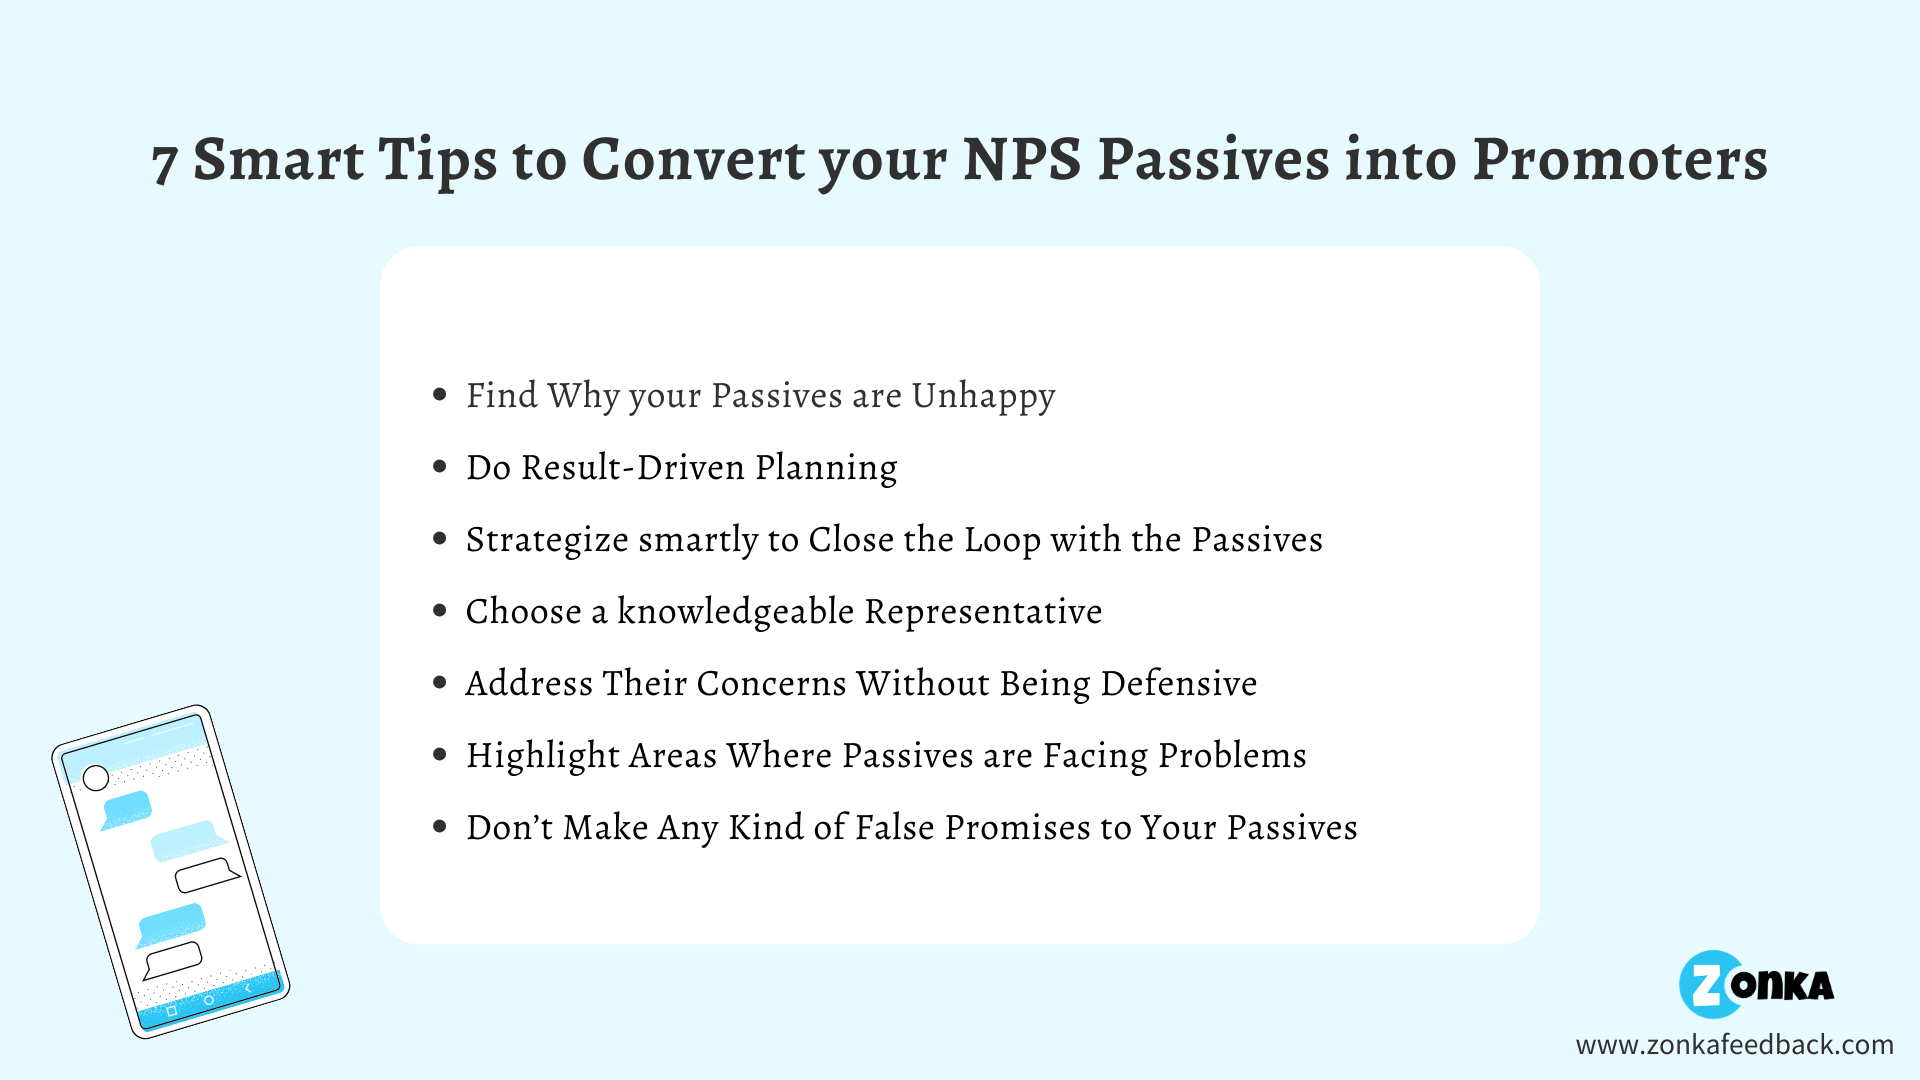 Tips to Convert your NPS Passives into Promoters